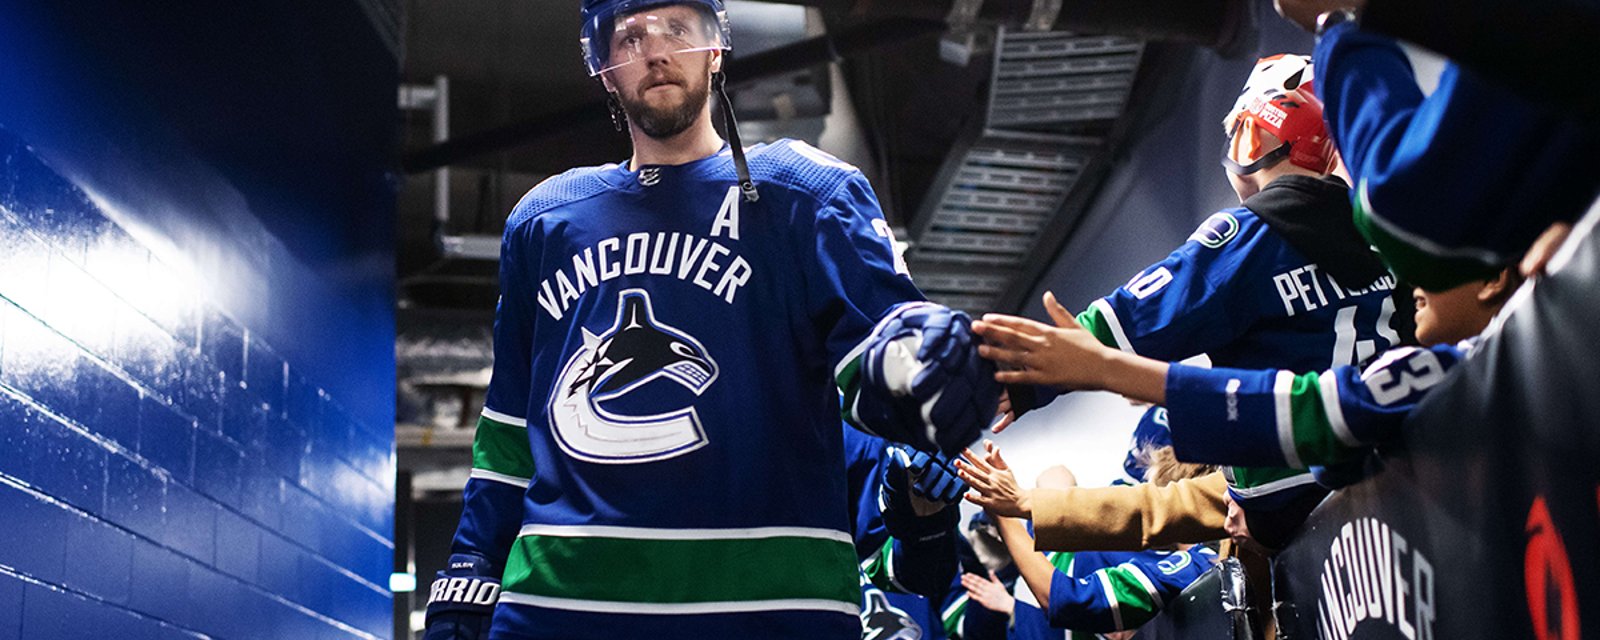 Rumor: Big changes coming for Canucks